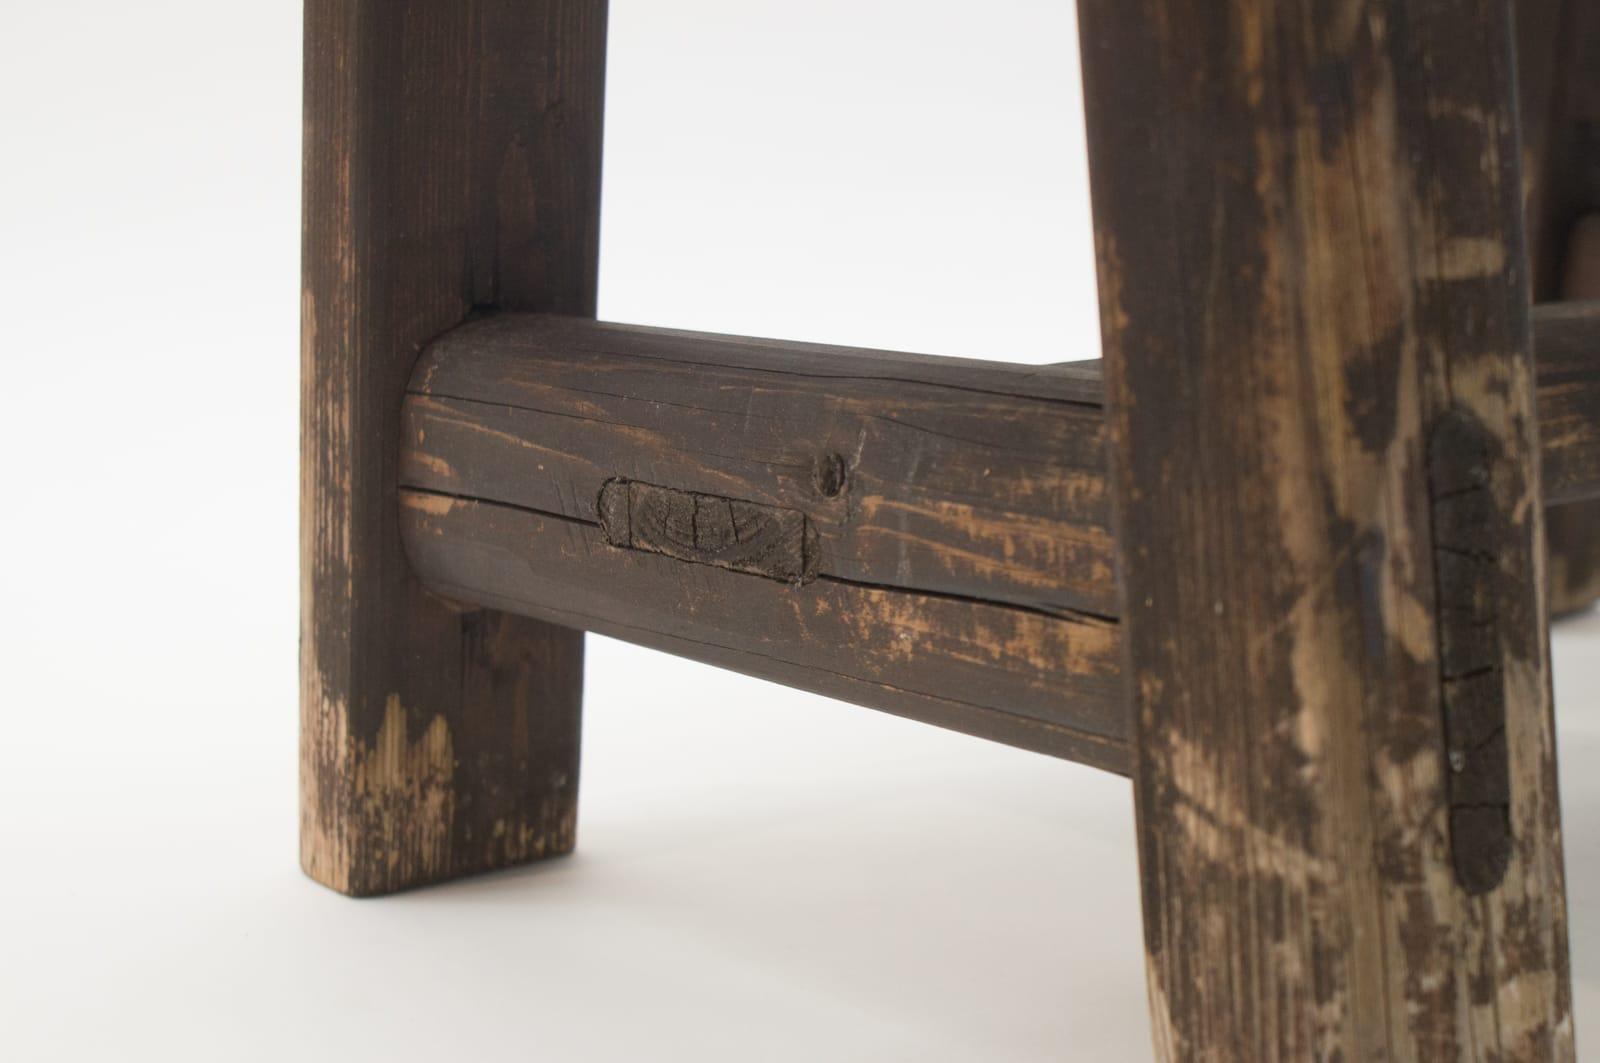 Black Forest Wooden Bench, 1930s-1940s Germany 7